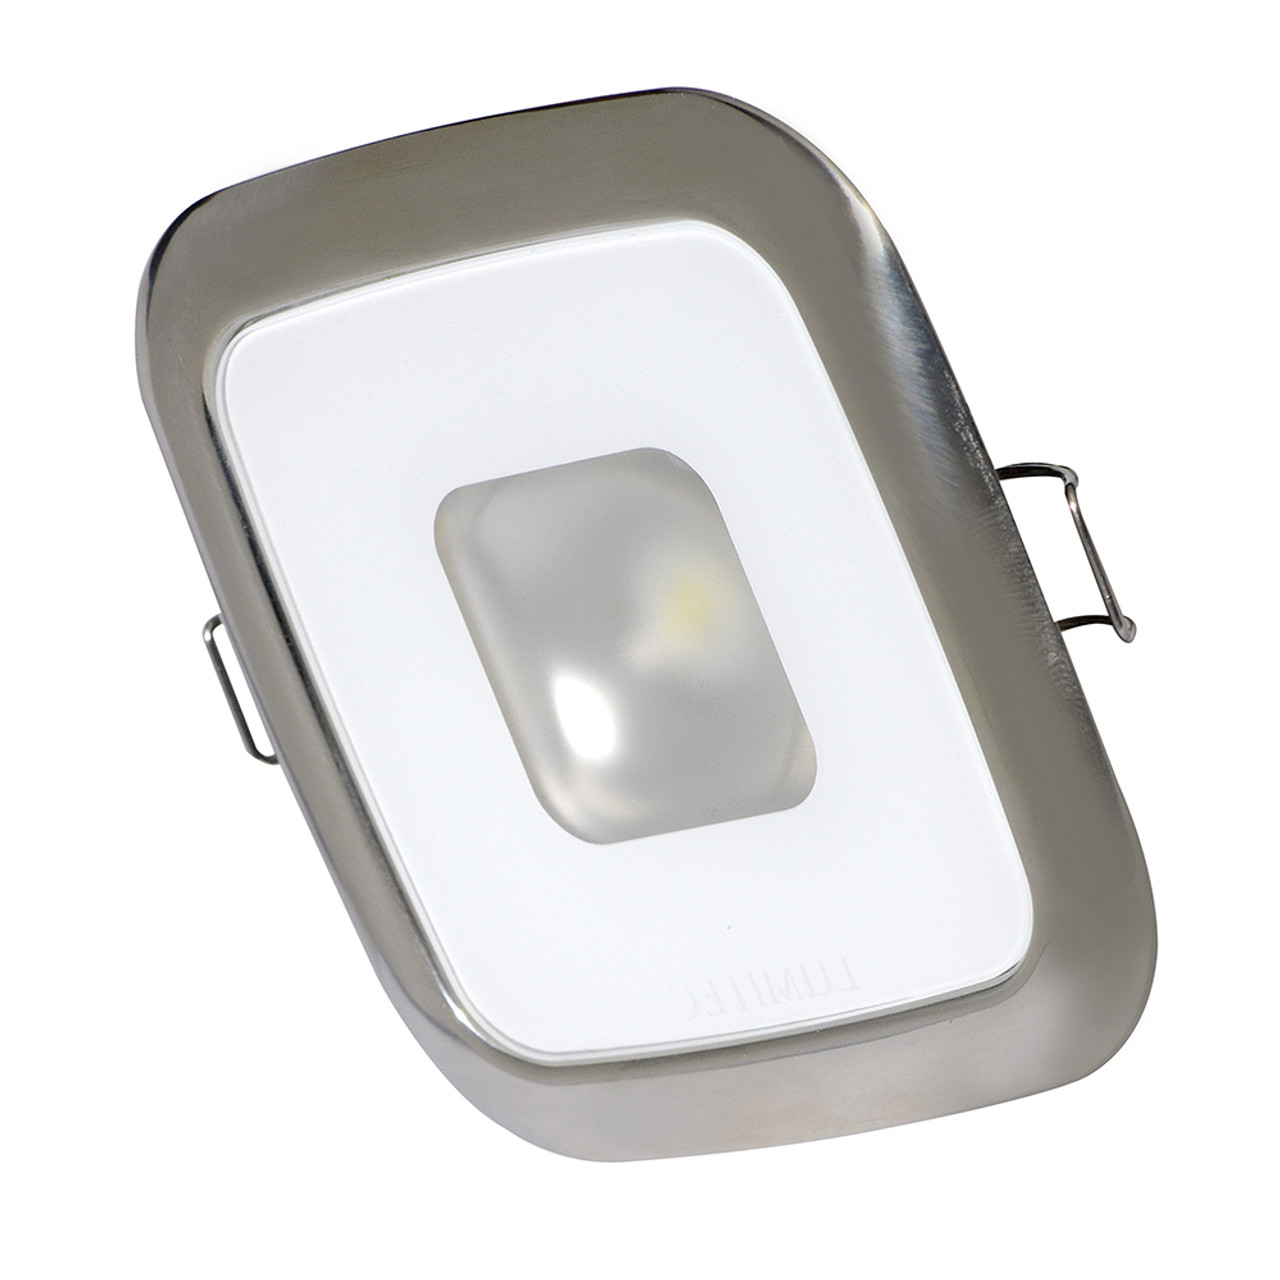 Lumitec Square Mirage Down Light - White Dimming, Red\/Blue Non-Dimming - Polished Bezel [116118]